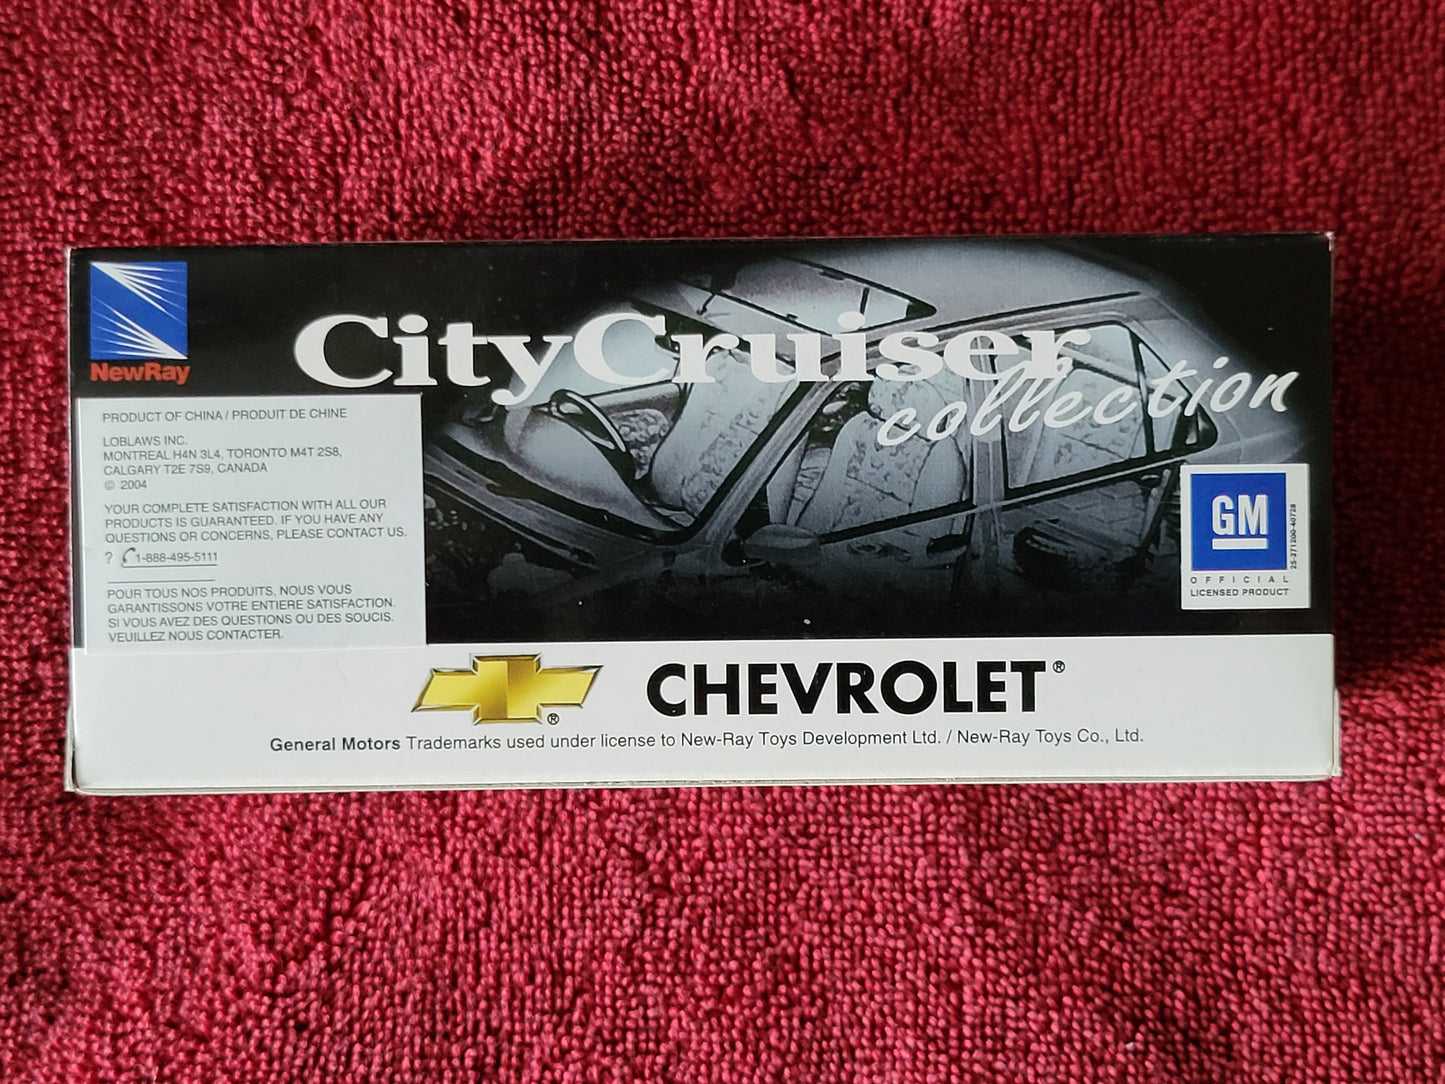 1969 Chevrolet Corvette Convertible New Ray City Cruiser Collection 1:43 NEW